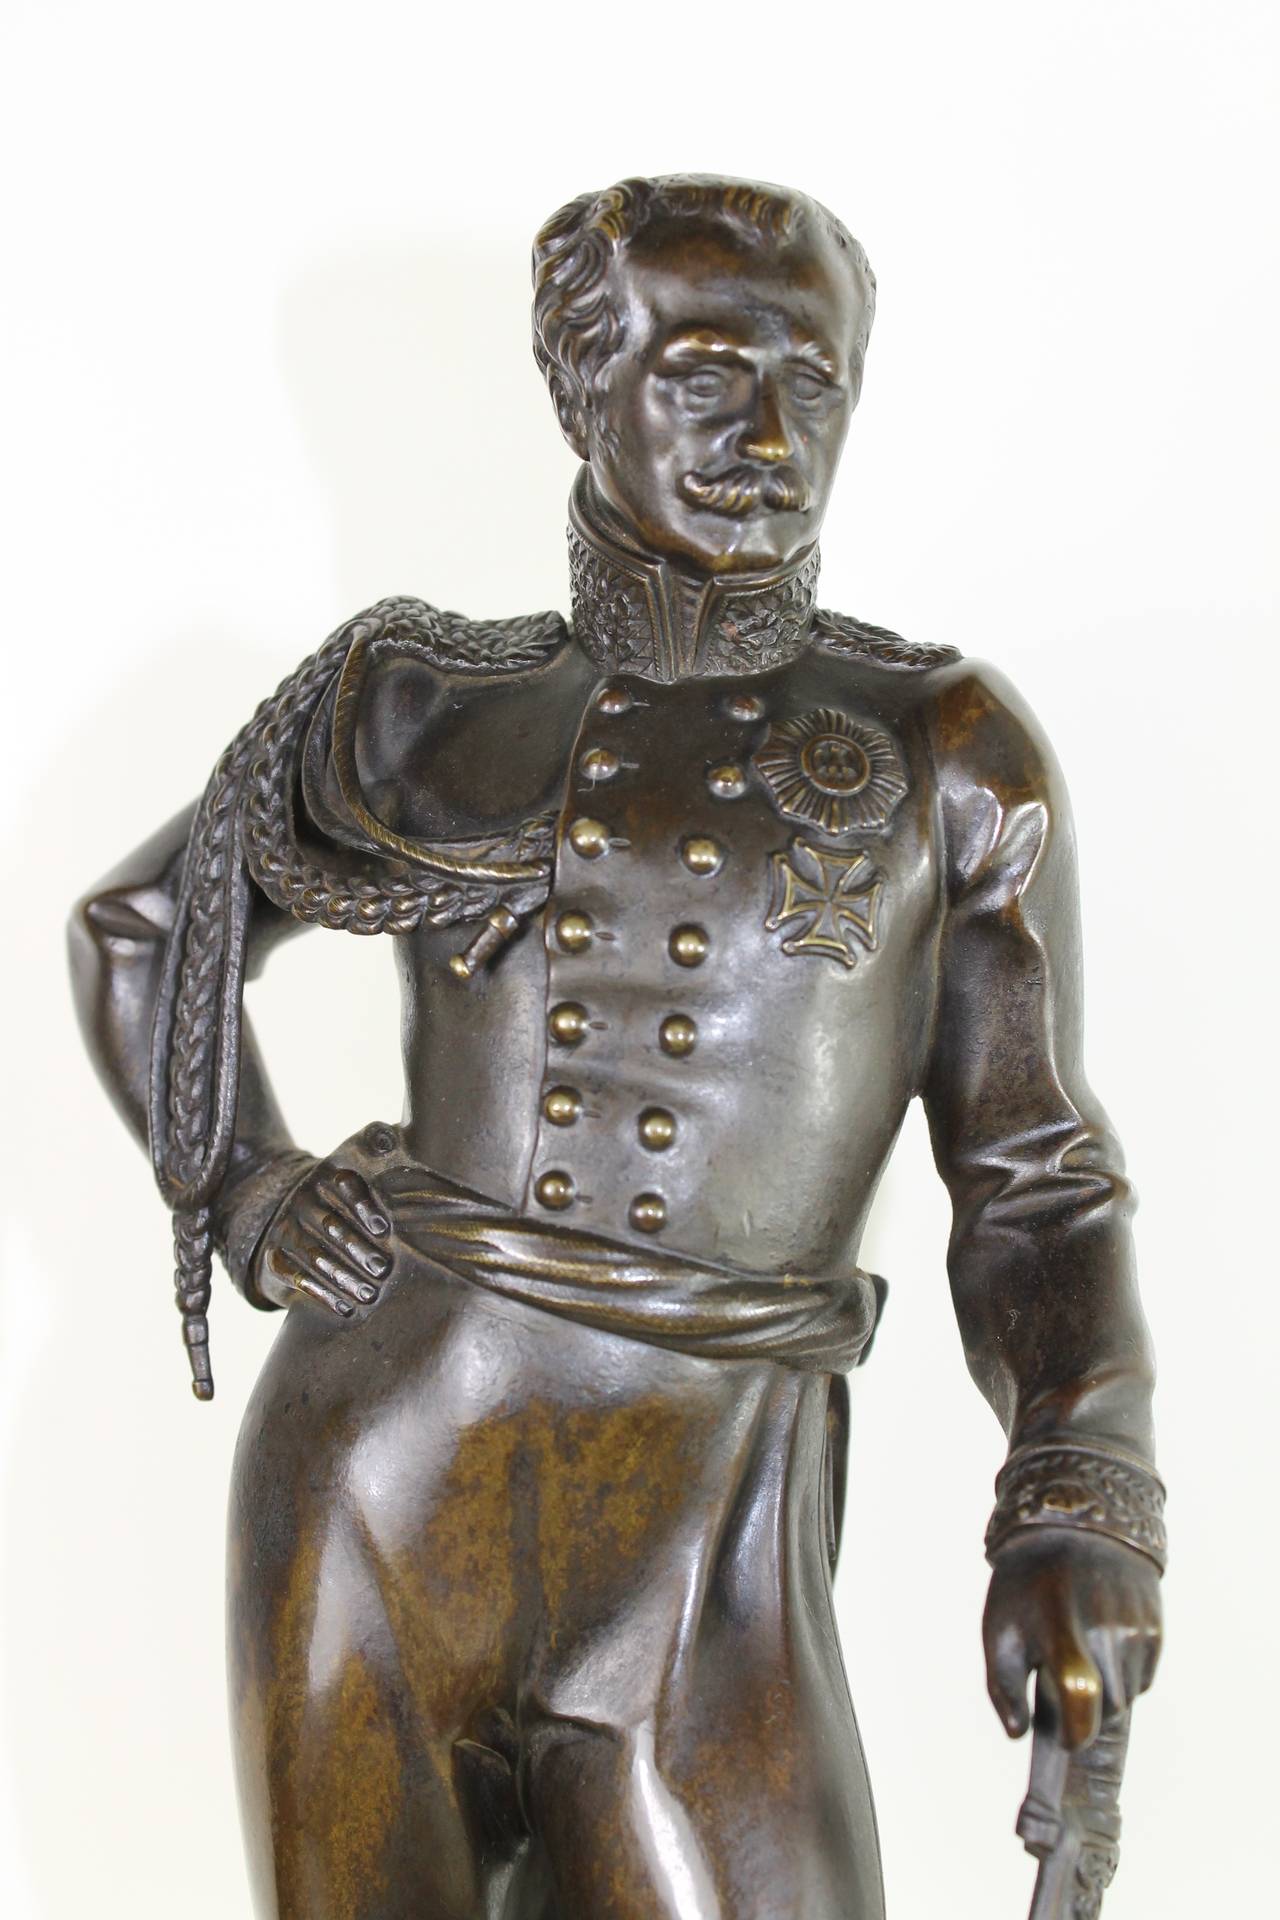 A German Officer, Leaning on his Saber, in Bronze, Standing on a Carrara Marble Base. Very Detailed